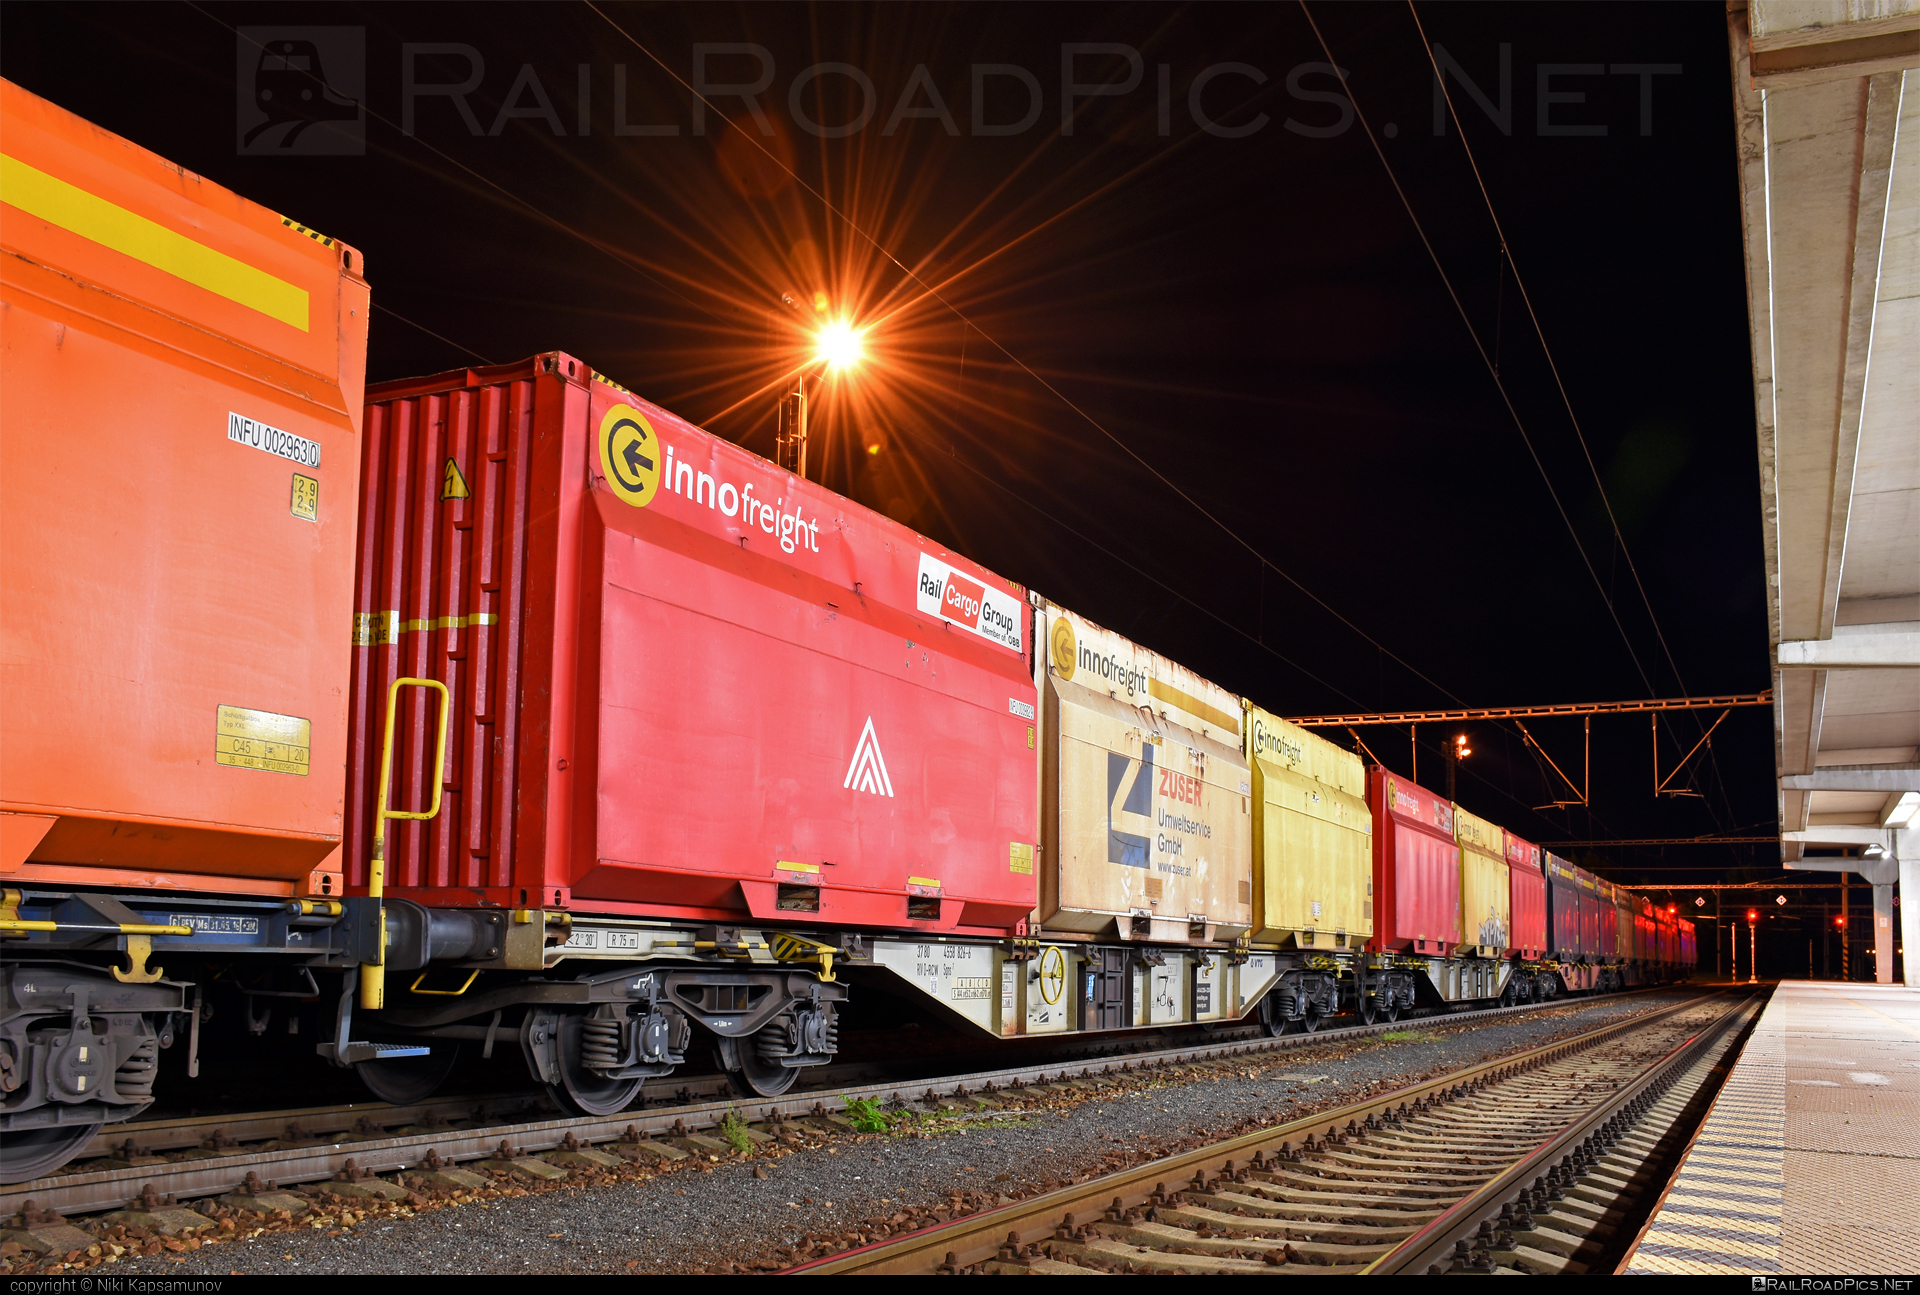 Class S - Sgns - 4558 826-6 operated by Rail Cargo Austria AG #flatwagon #innofreight #rcw #sgns